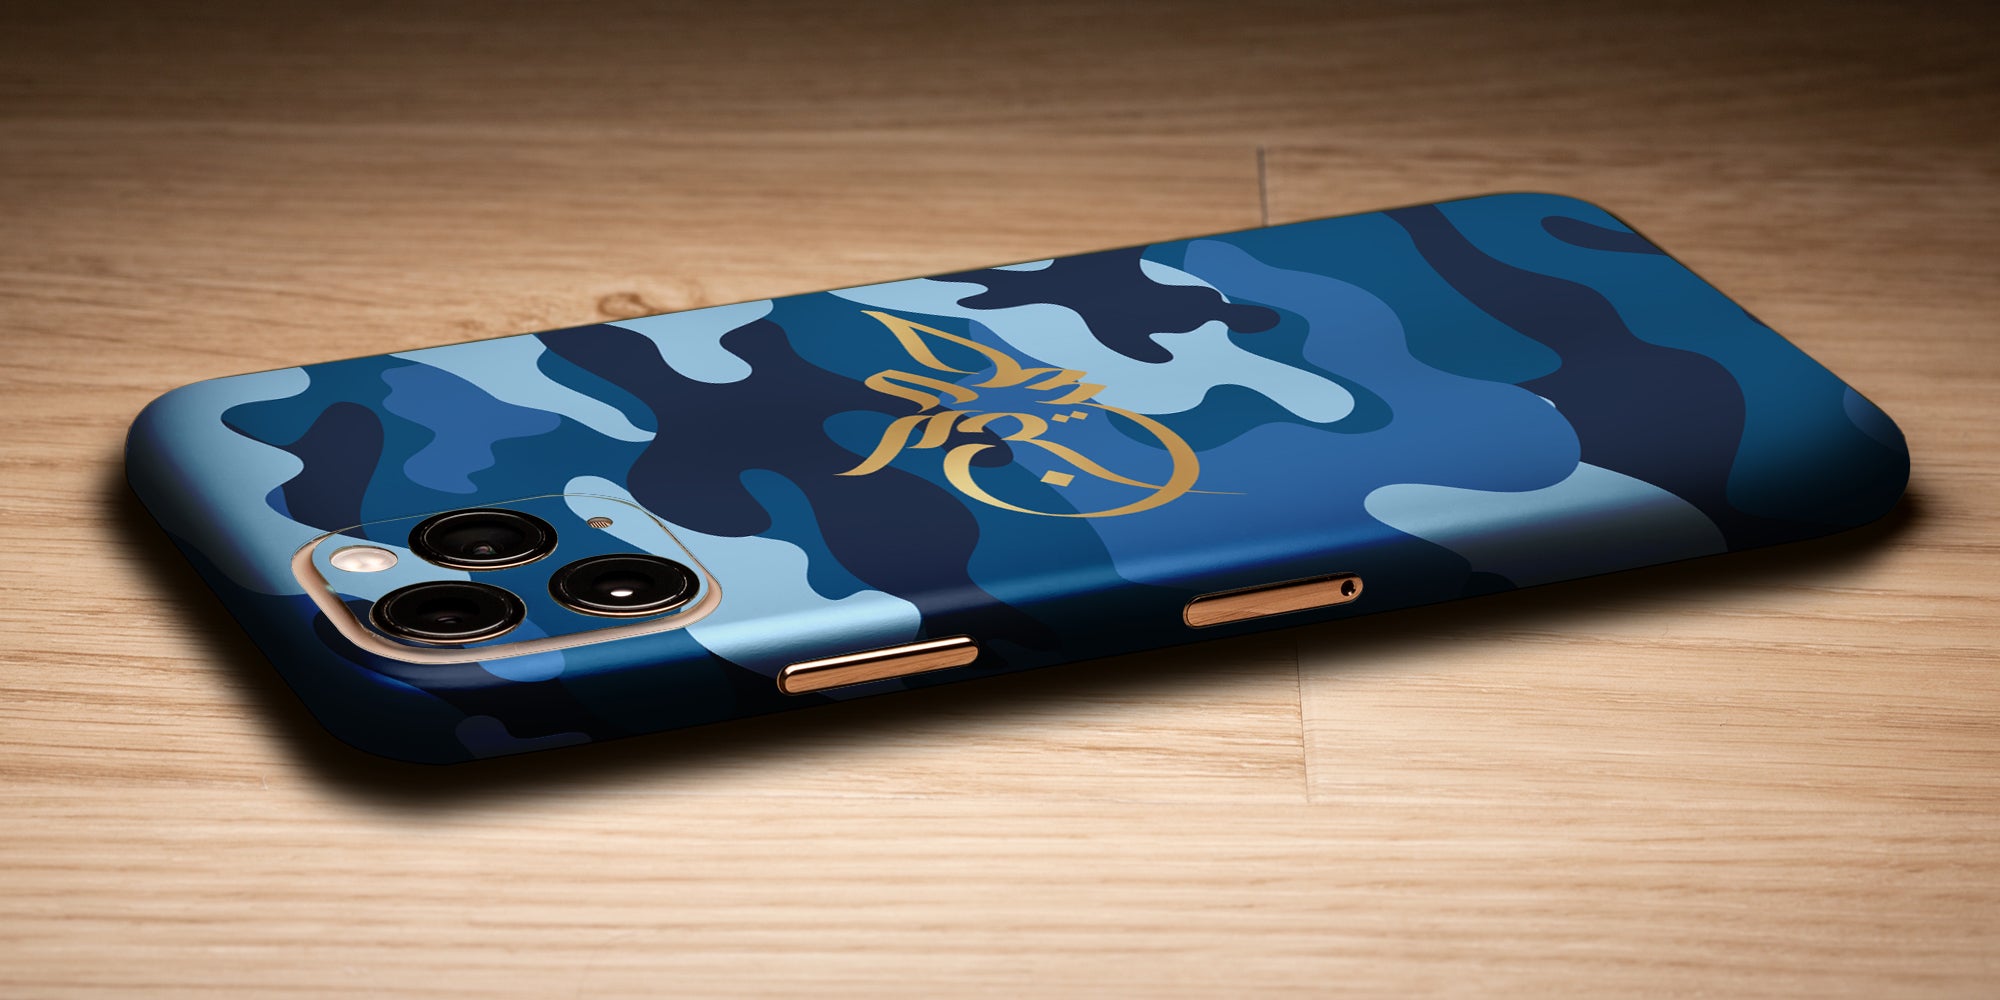 Camoflague Design Decal Skin With Personalised Arabic Name Phone Wrap - Blue